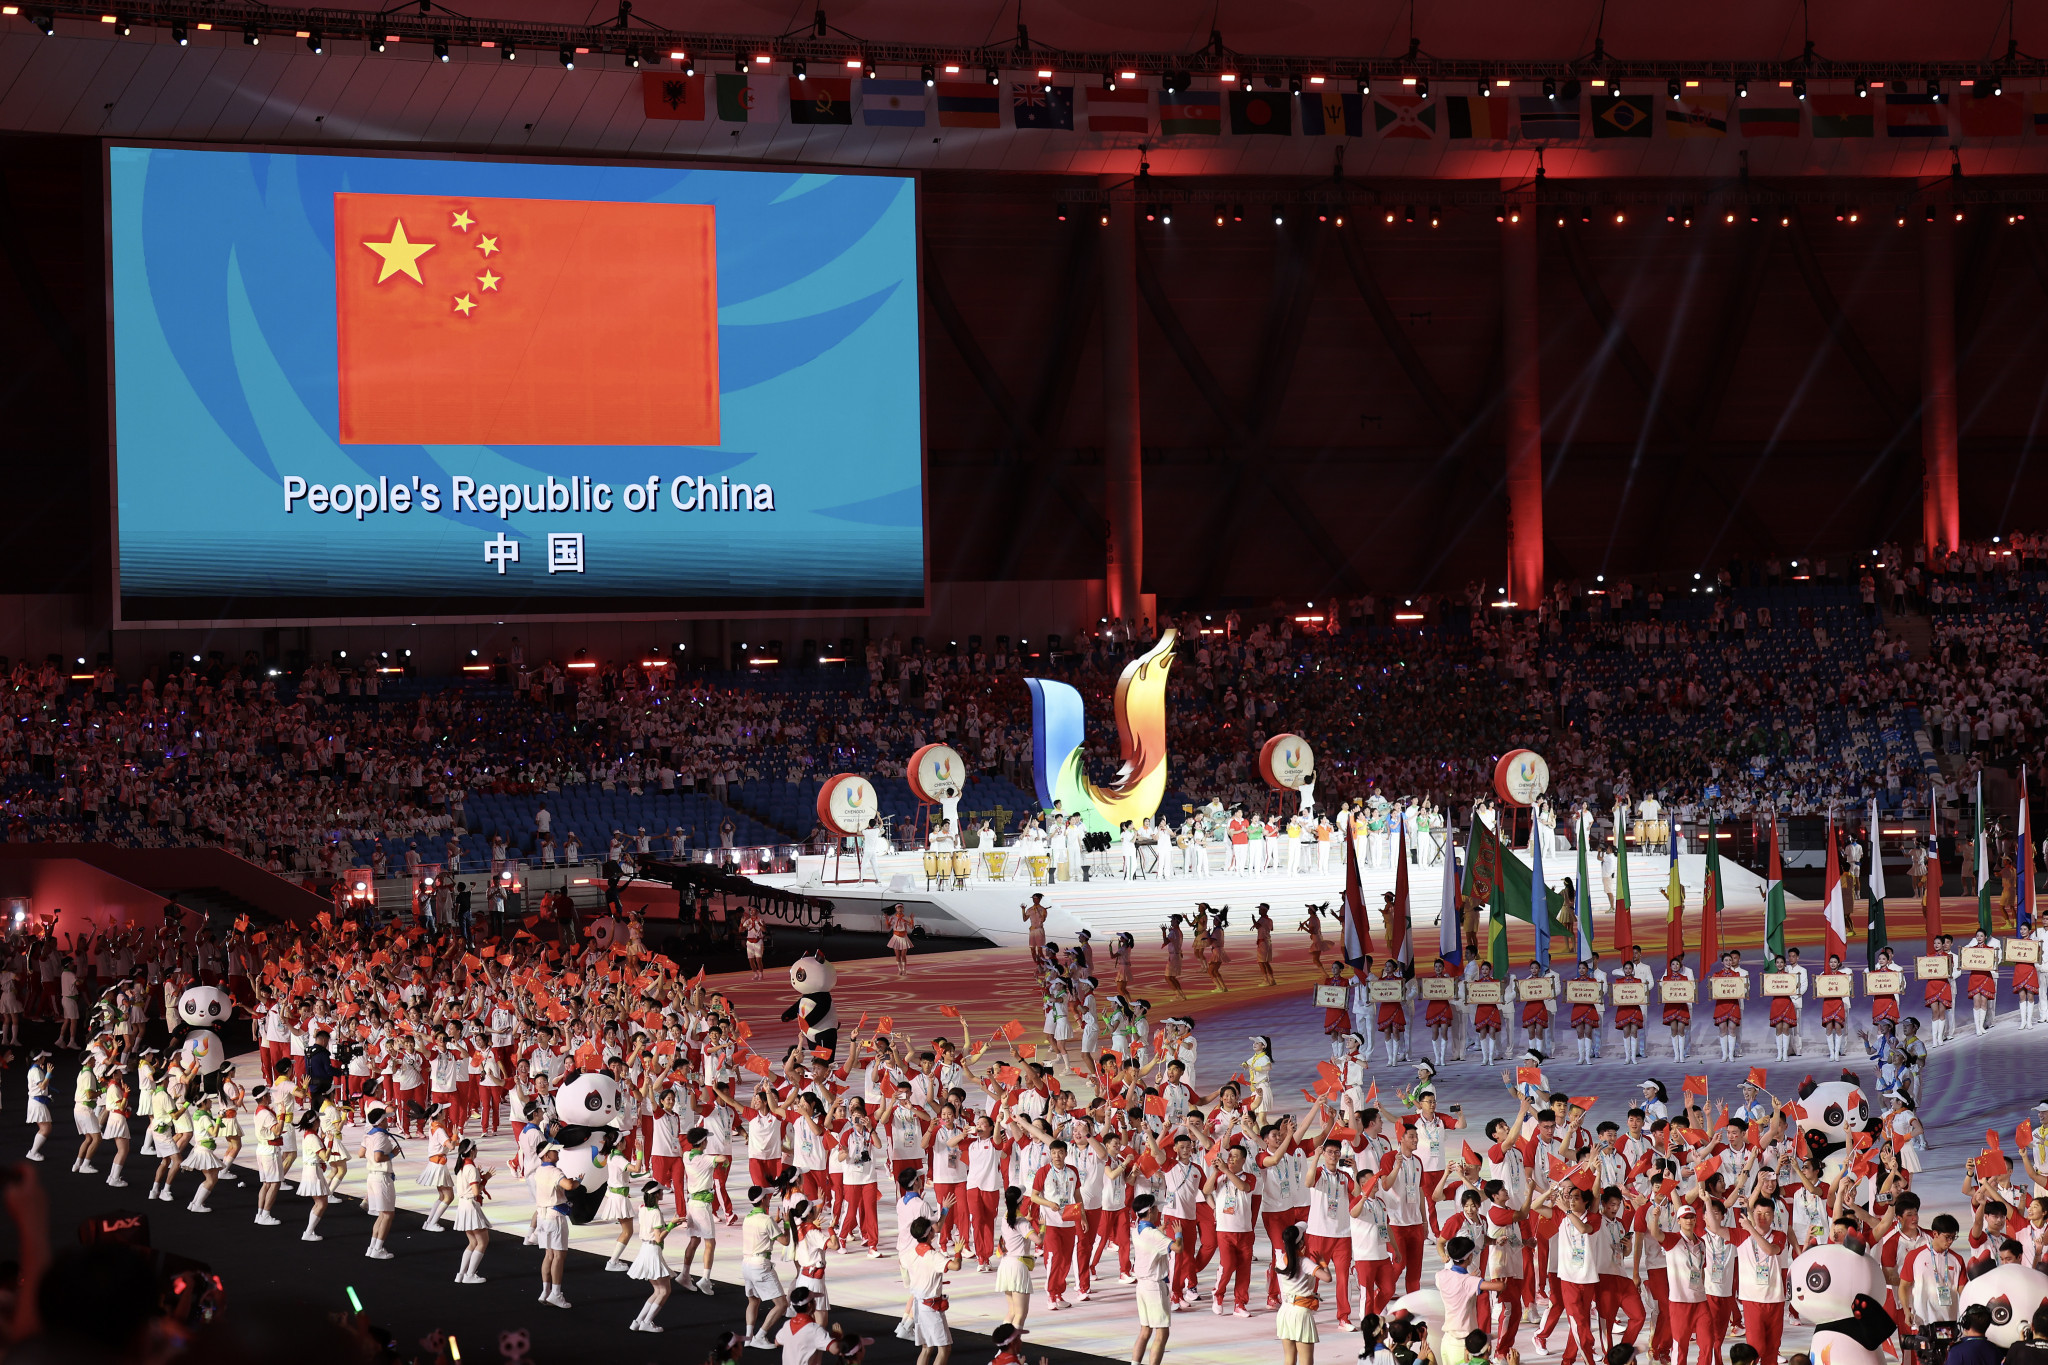 Hosts China had 530 participants who participated in the Parade of Nations ©Getty Images